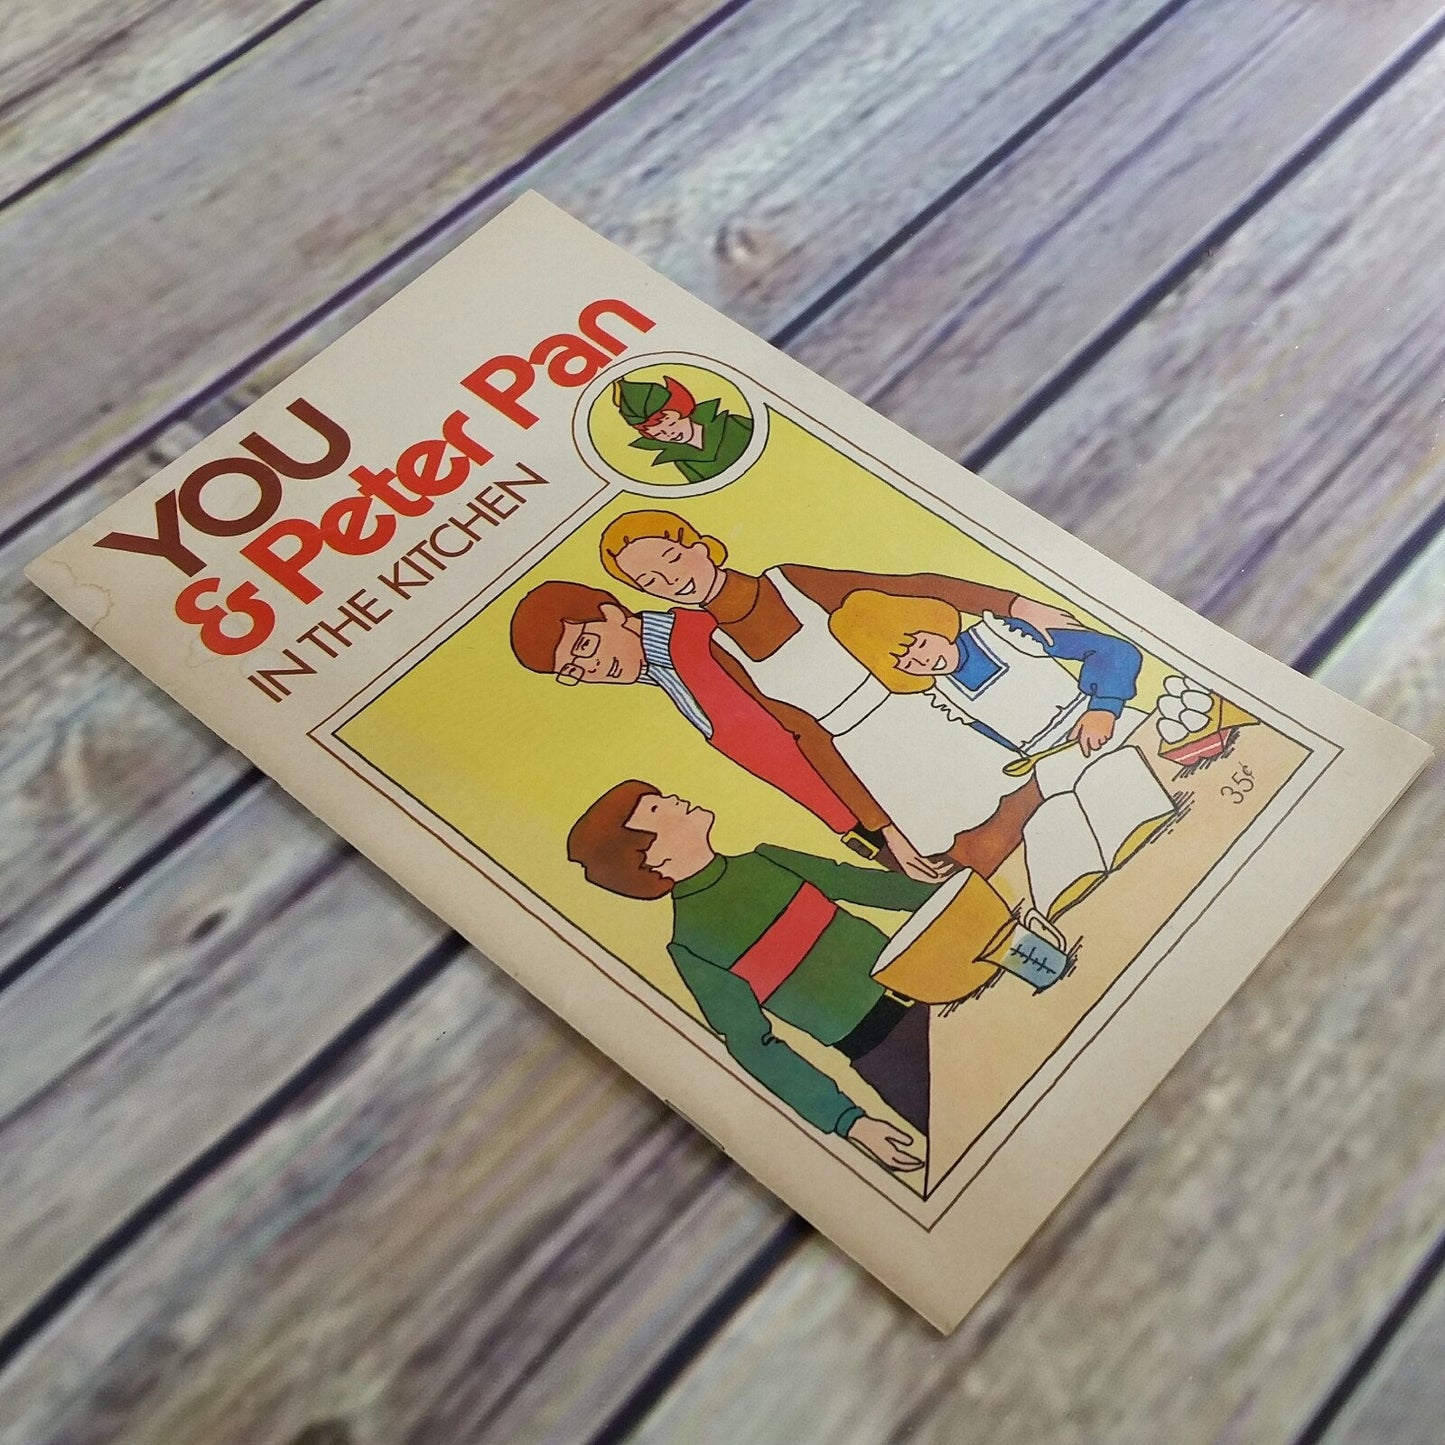 Vintage Kids Cookbook You and Peter Pan in the Kitchen Peanut Butter Recipes Promo Booklet Promo Recipes Ads 1970s 1980s